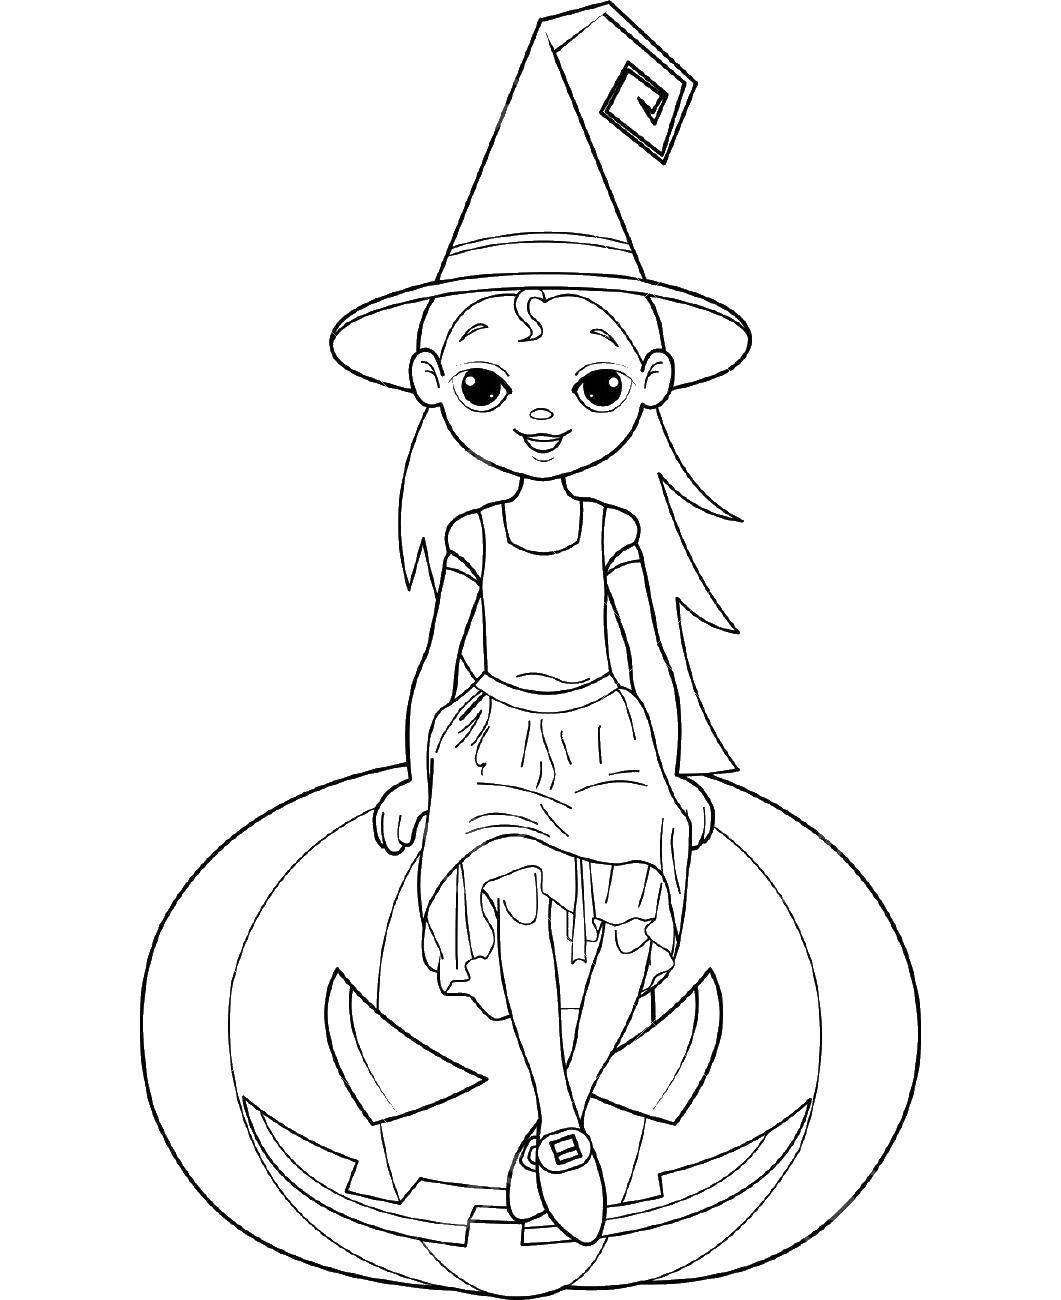 Coloring The witch sits on a pumpkin. Category witch. Tags:  witch, pumpkin.